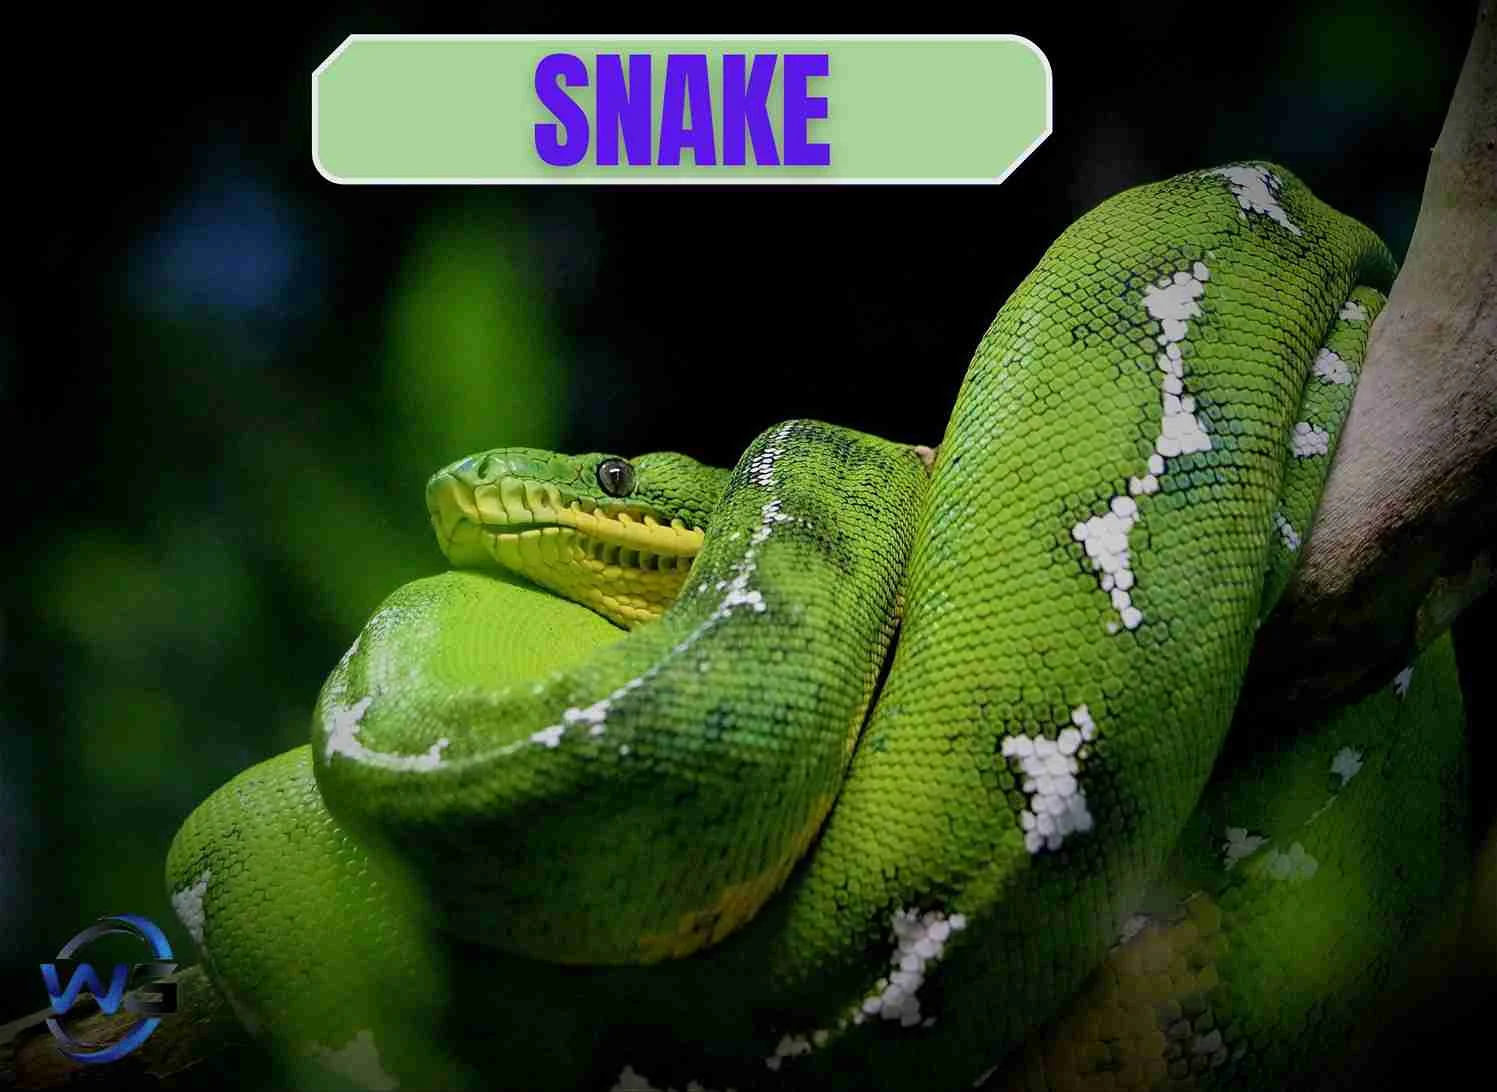 A close-up image of a green snake slithering on a tree branch in a forest.